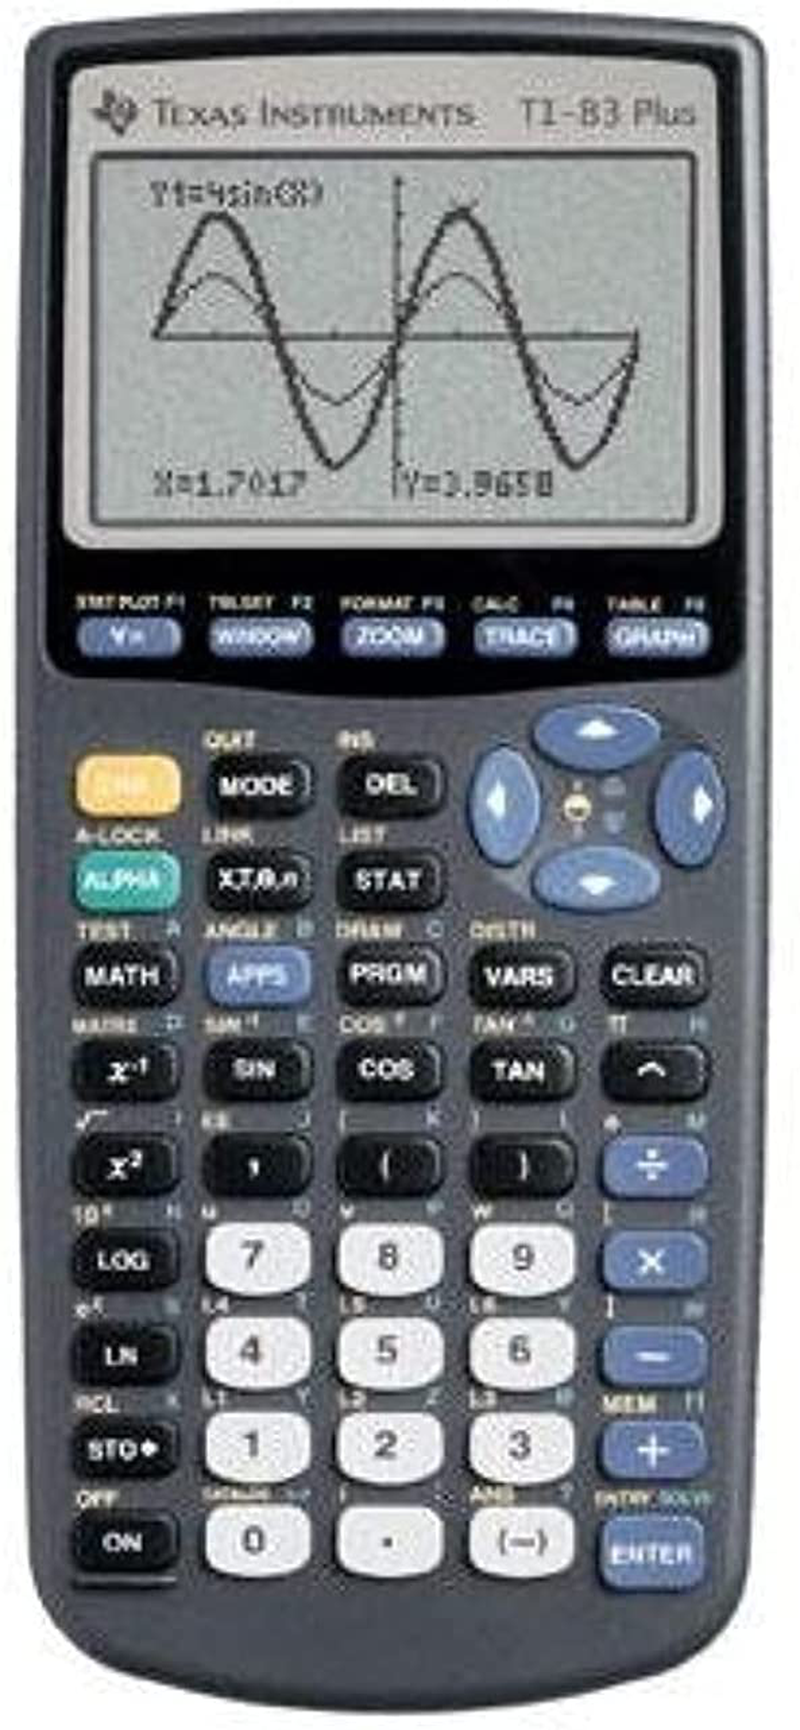 Texas Instruments 038117 Ti-83 Plus Graphing Calculator